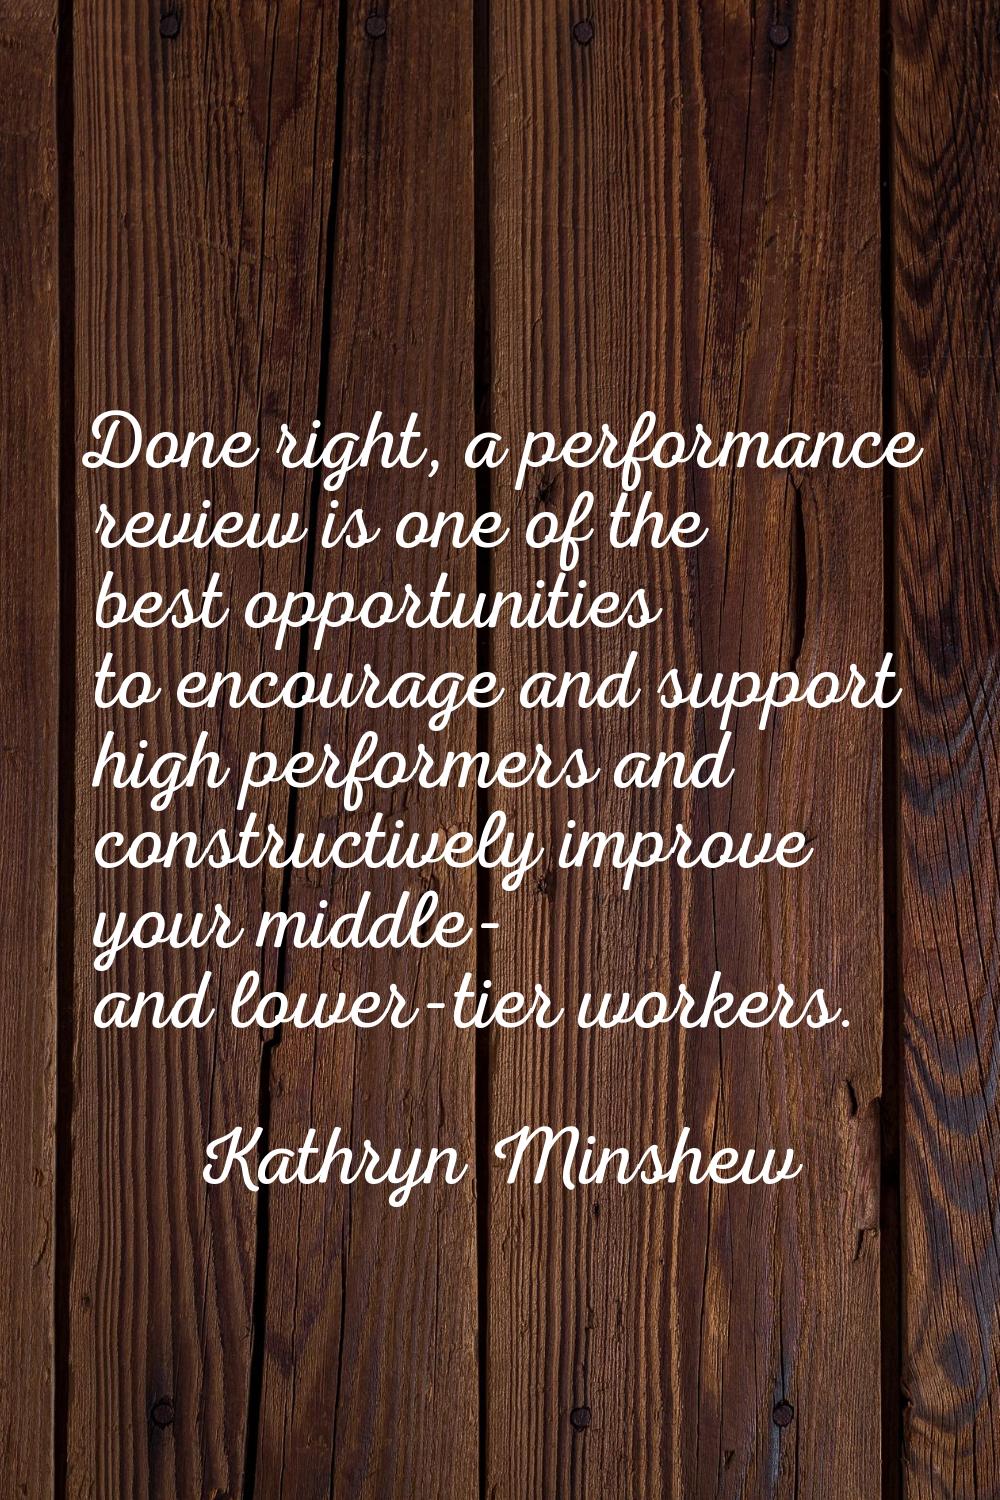 Done right, a performance review is one of the best opportunities to encourage and support high per